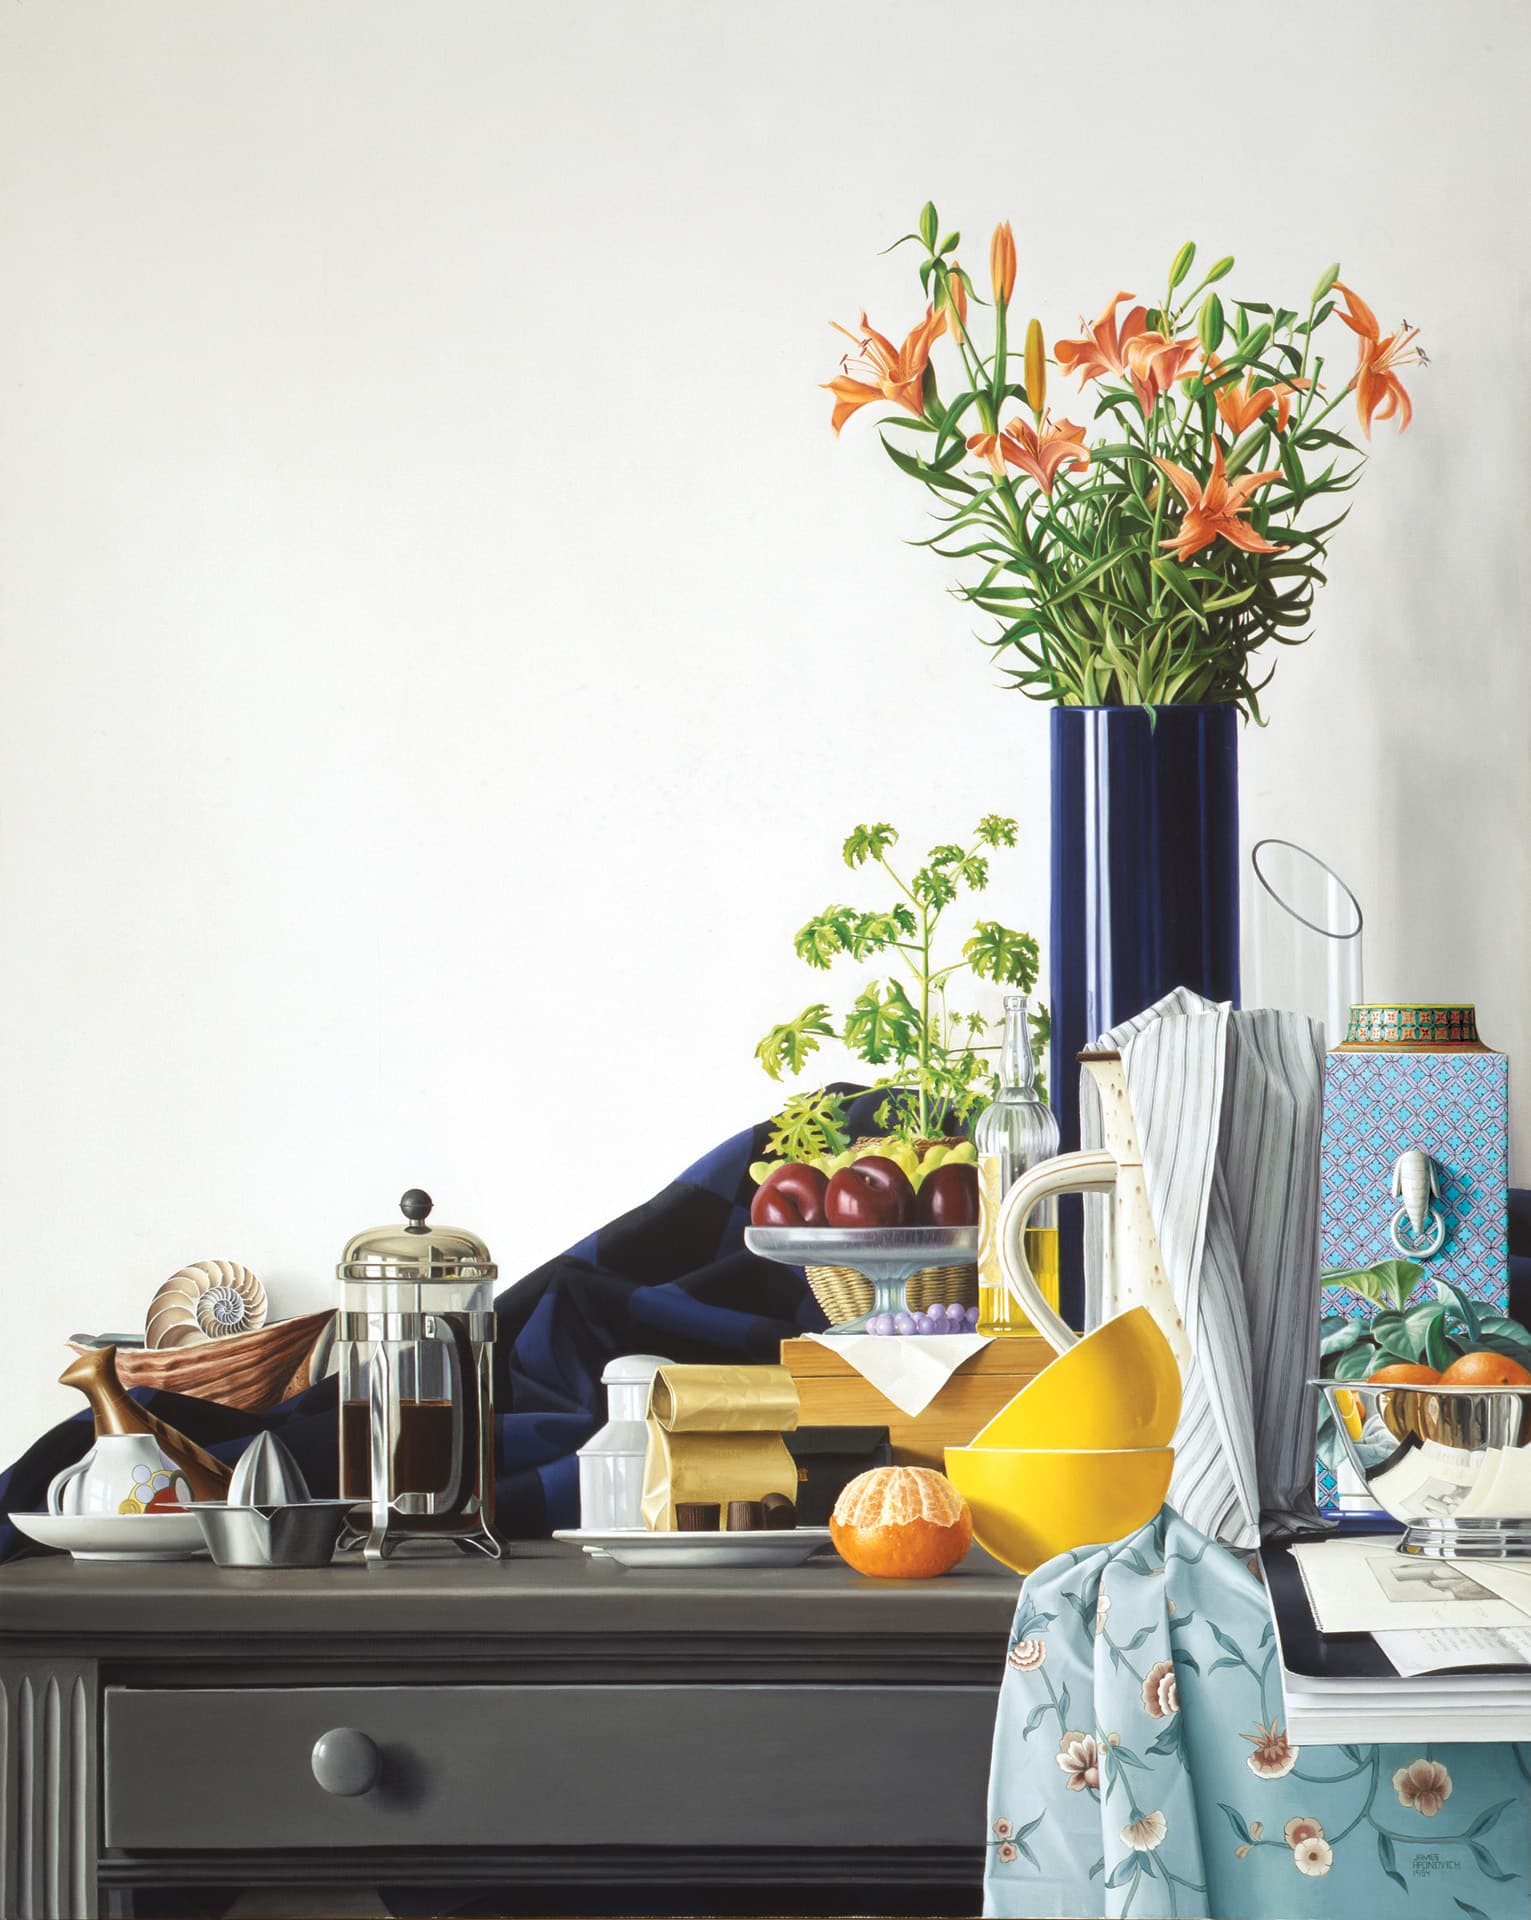 a still life with a vase of lillies, yellow bowls, a french press, a half-peeled orange and chocolates on a table